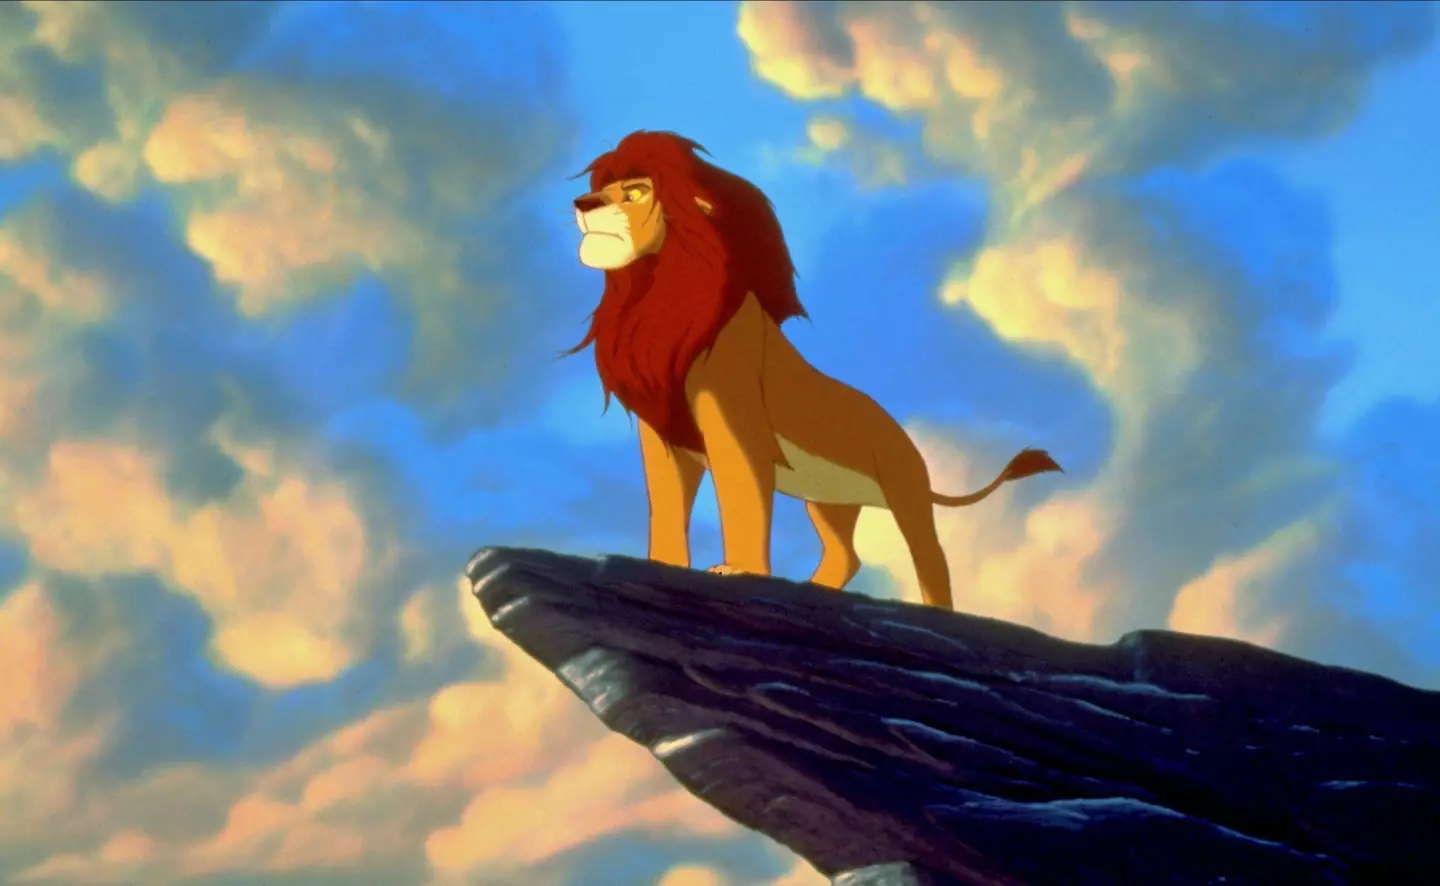 The Lion King is regarded by many as one of the best animated films of all time.